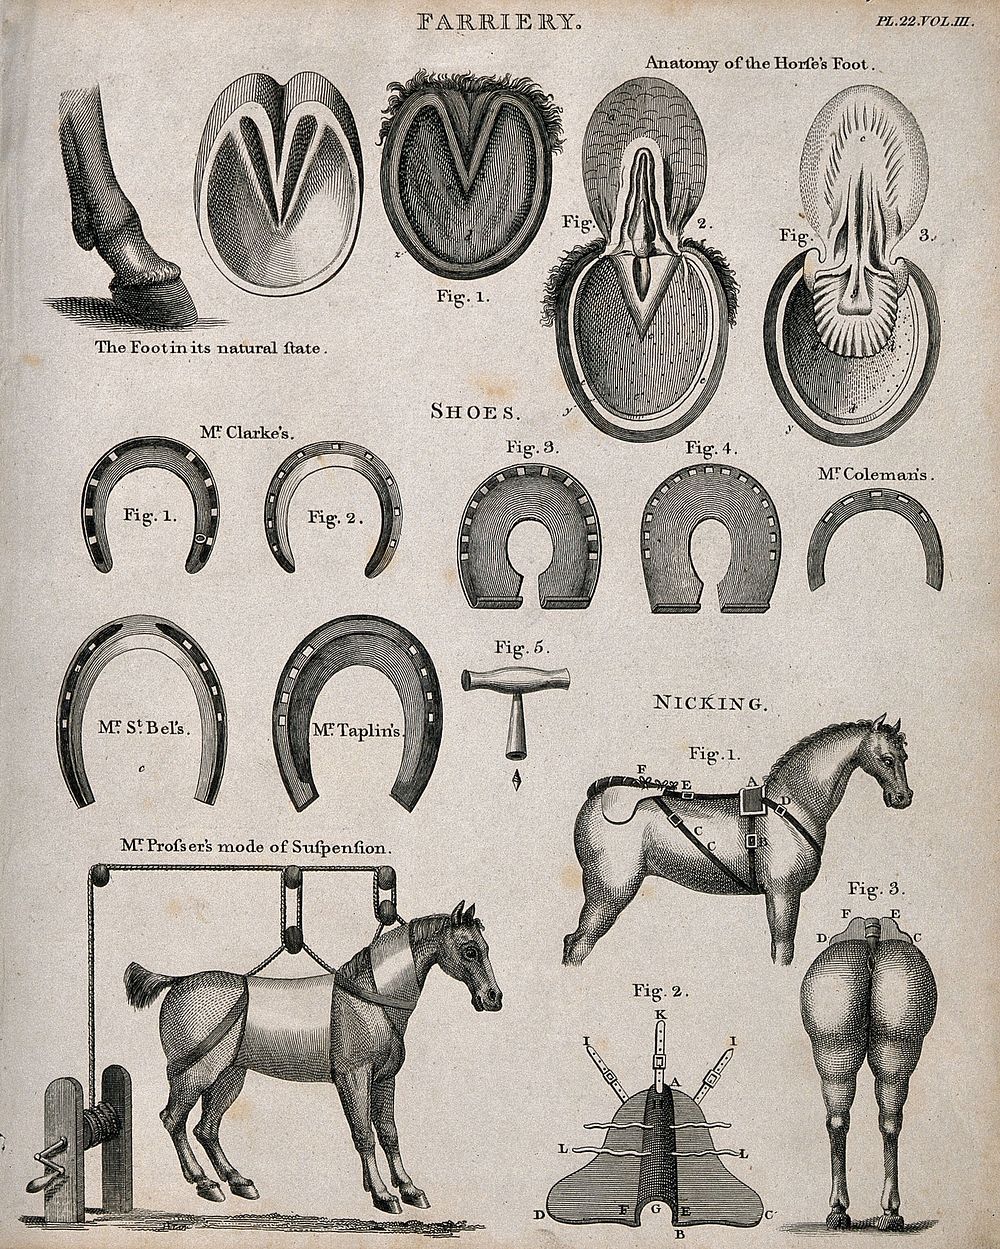 Farriery: seventeen figures including the anatomy of horses' hooves, a selection of horse-shoes, a horse suspended on a…